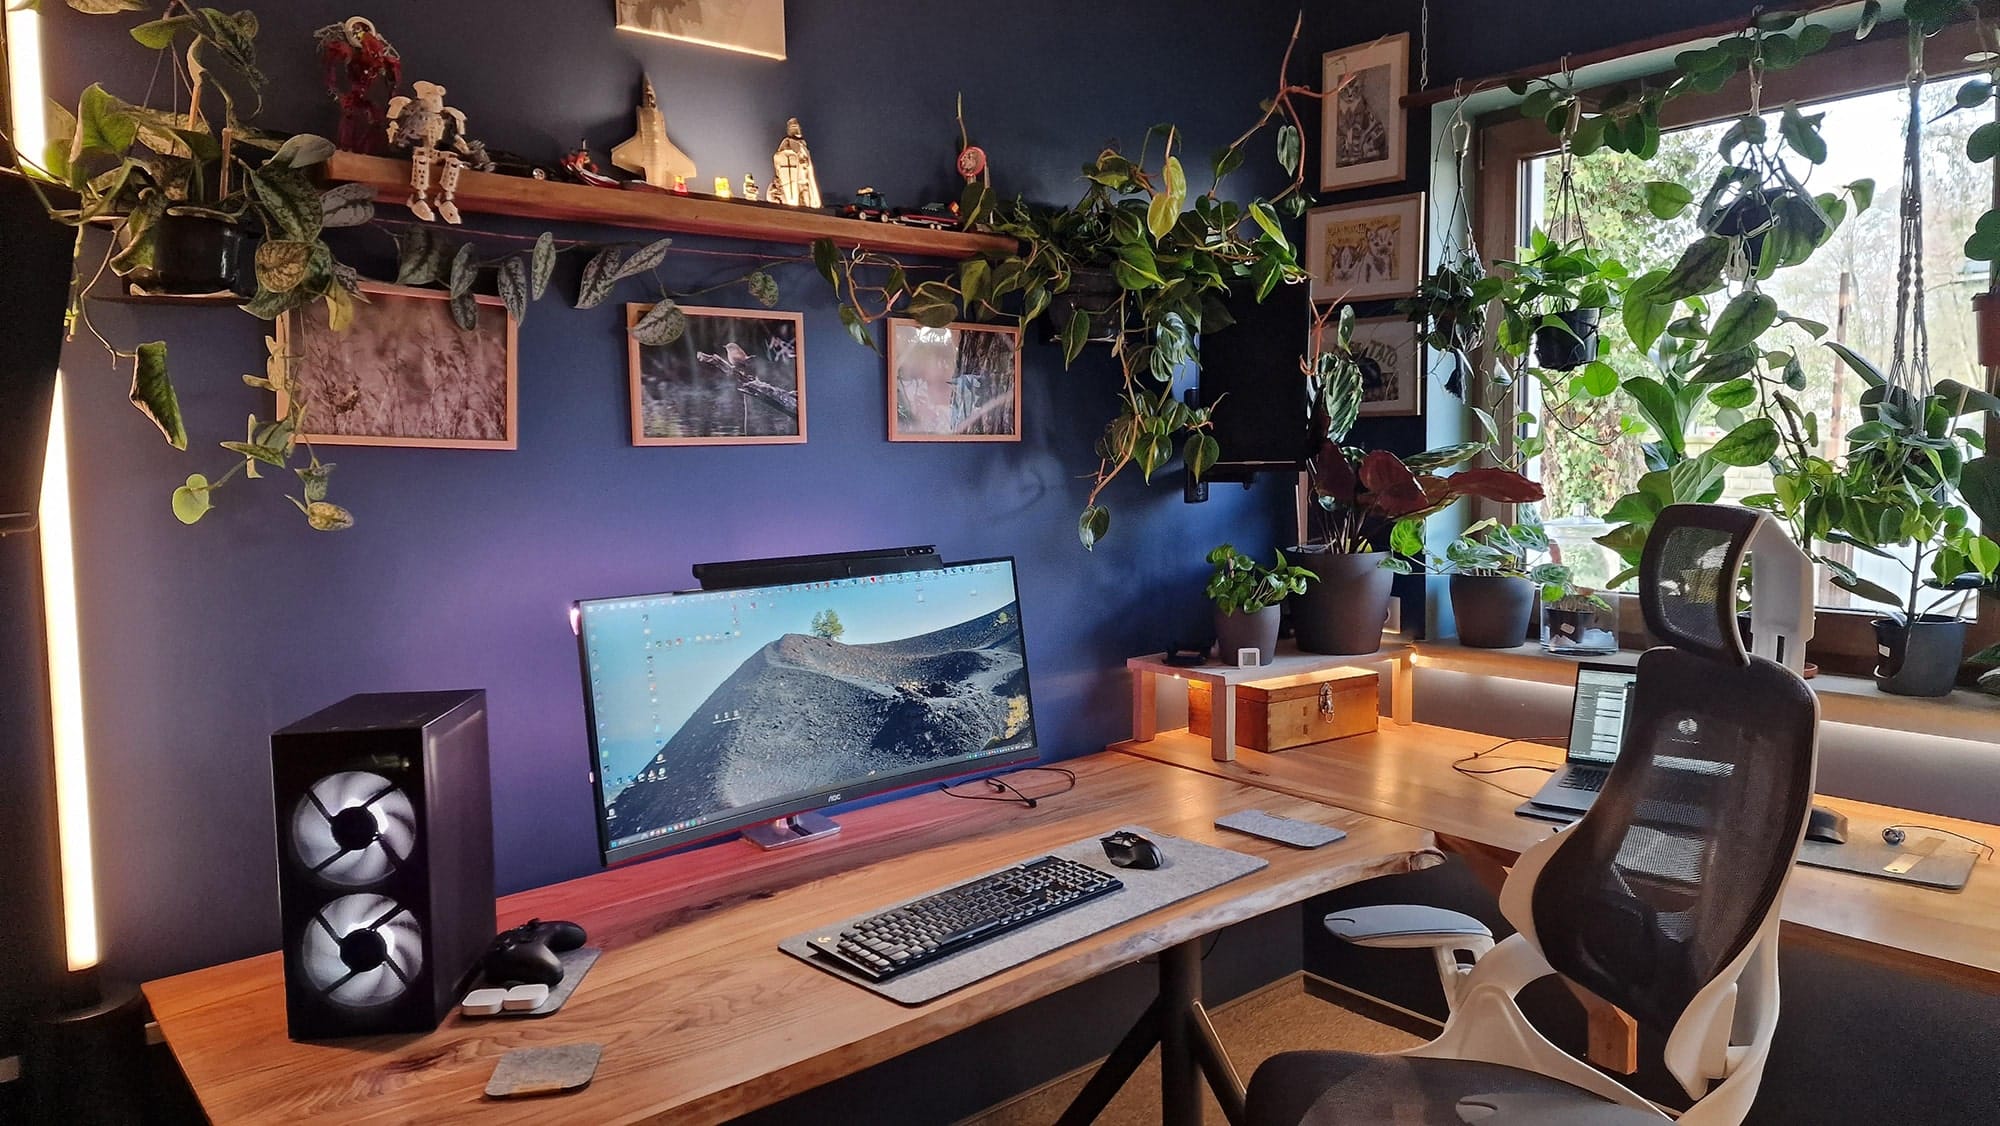 A spacious and modern home office adorned with lush green plants and featuring a large desk with a gaming monitor, ergonomic chair, and atmospheric lighting